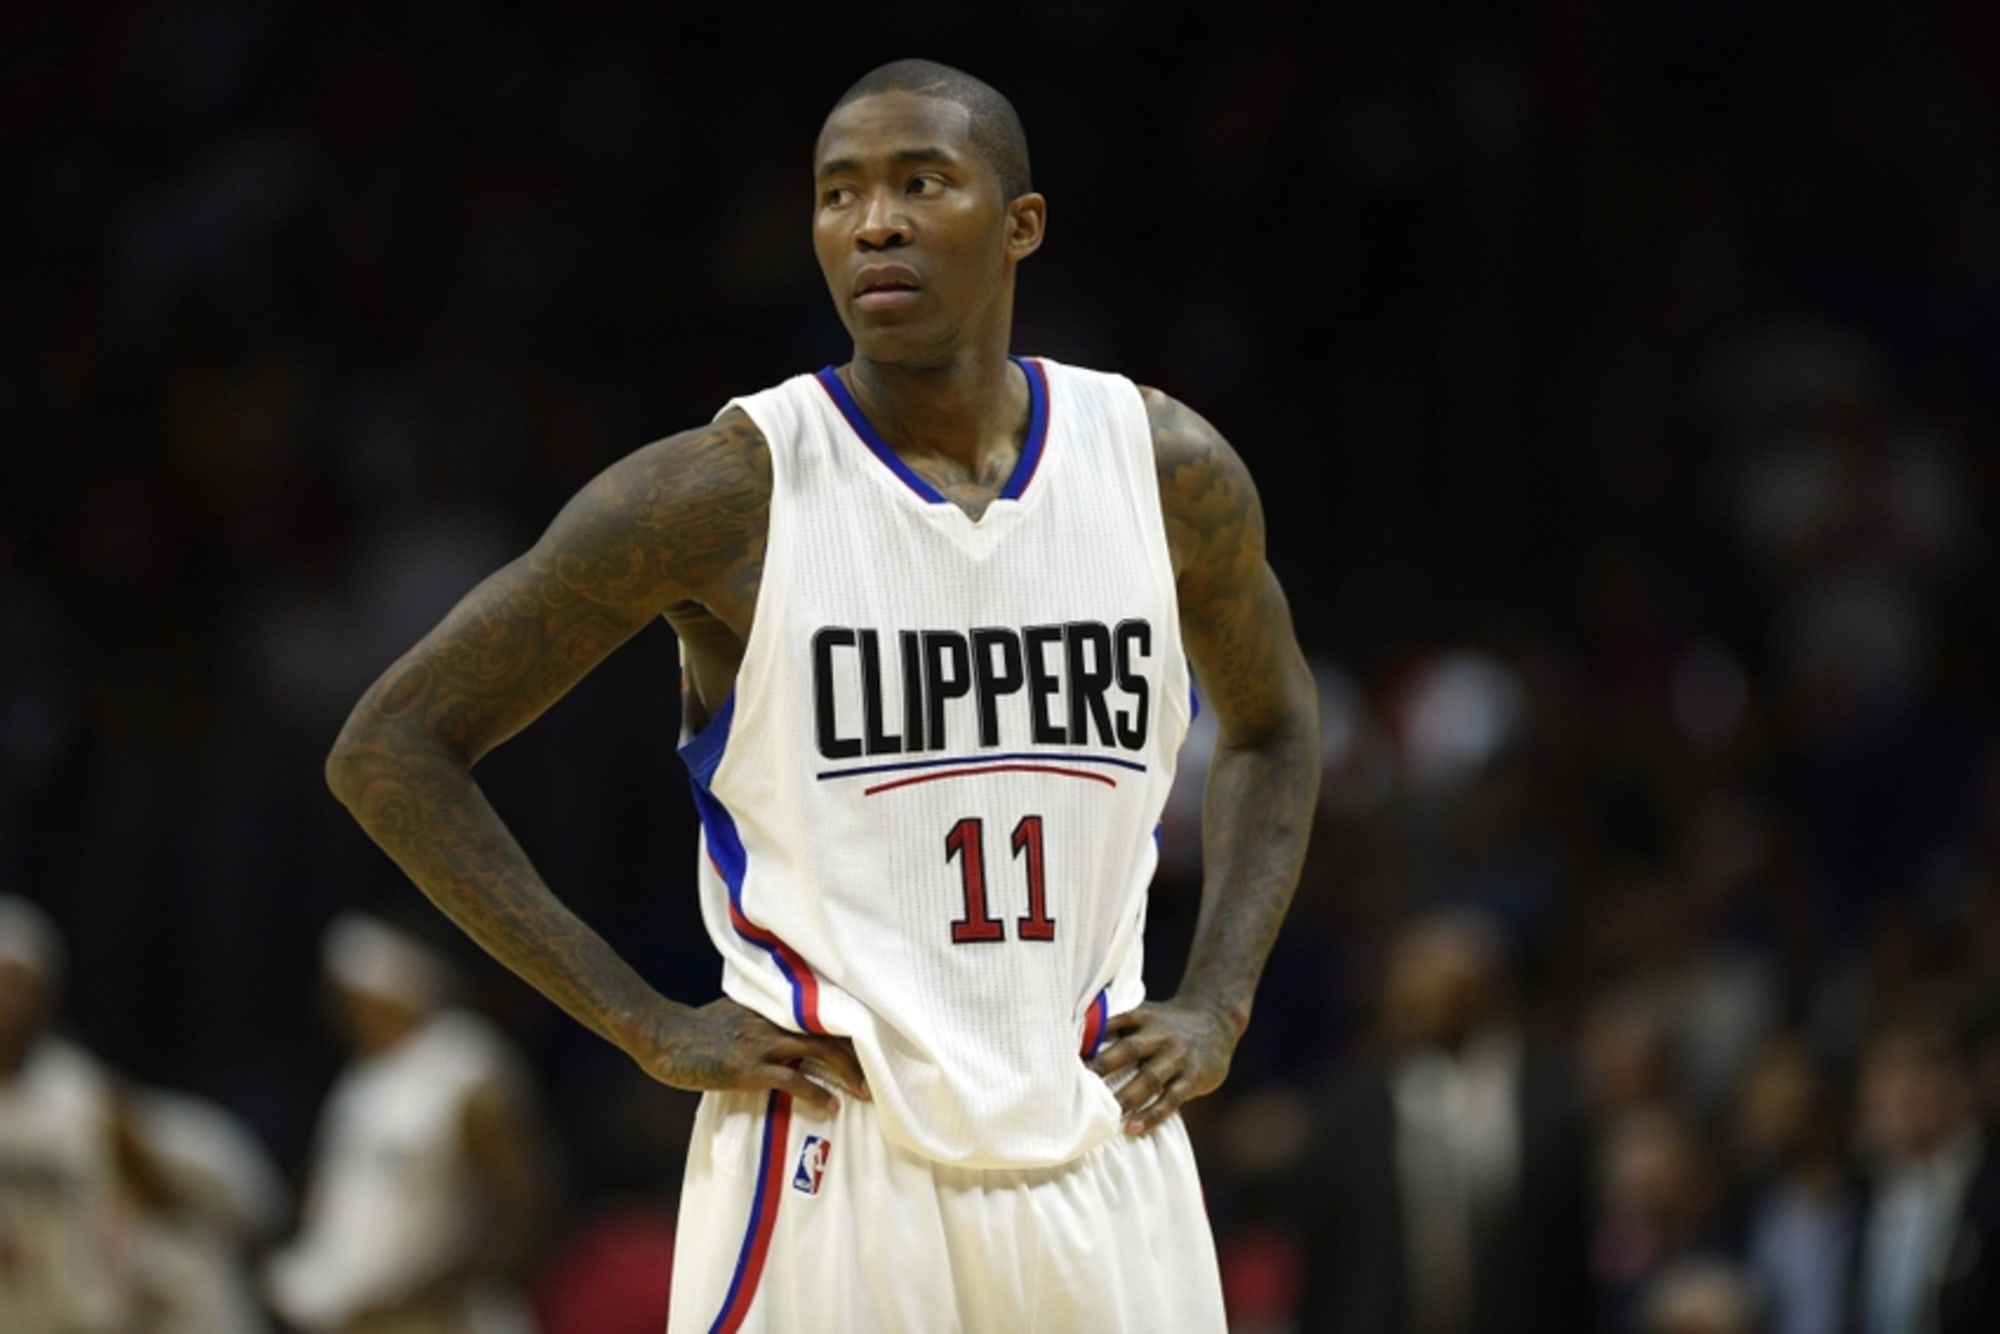 Jamal Crawford Los Angeles Clippers Mitchell & Ness NBA 12-13